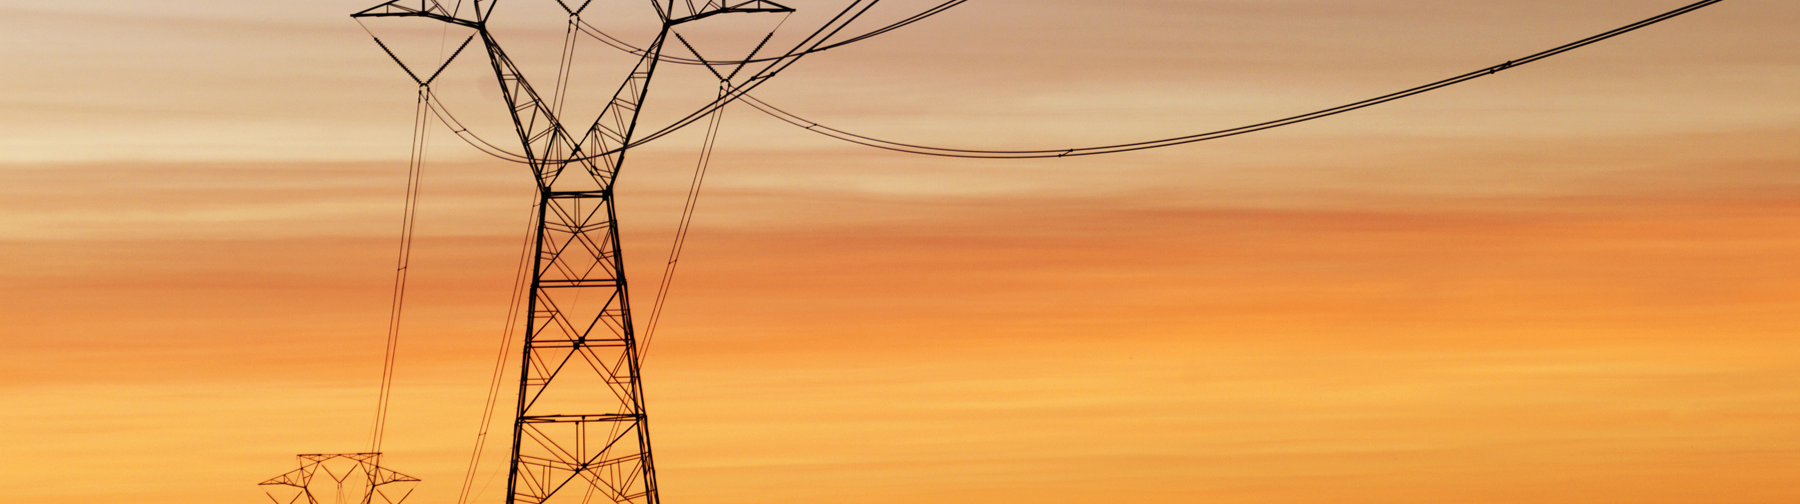 electric lines at sunrise